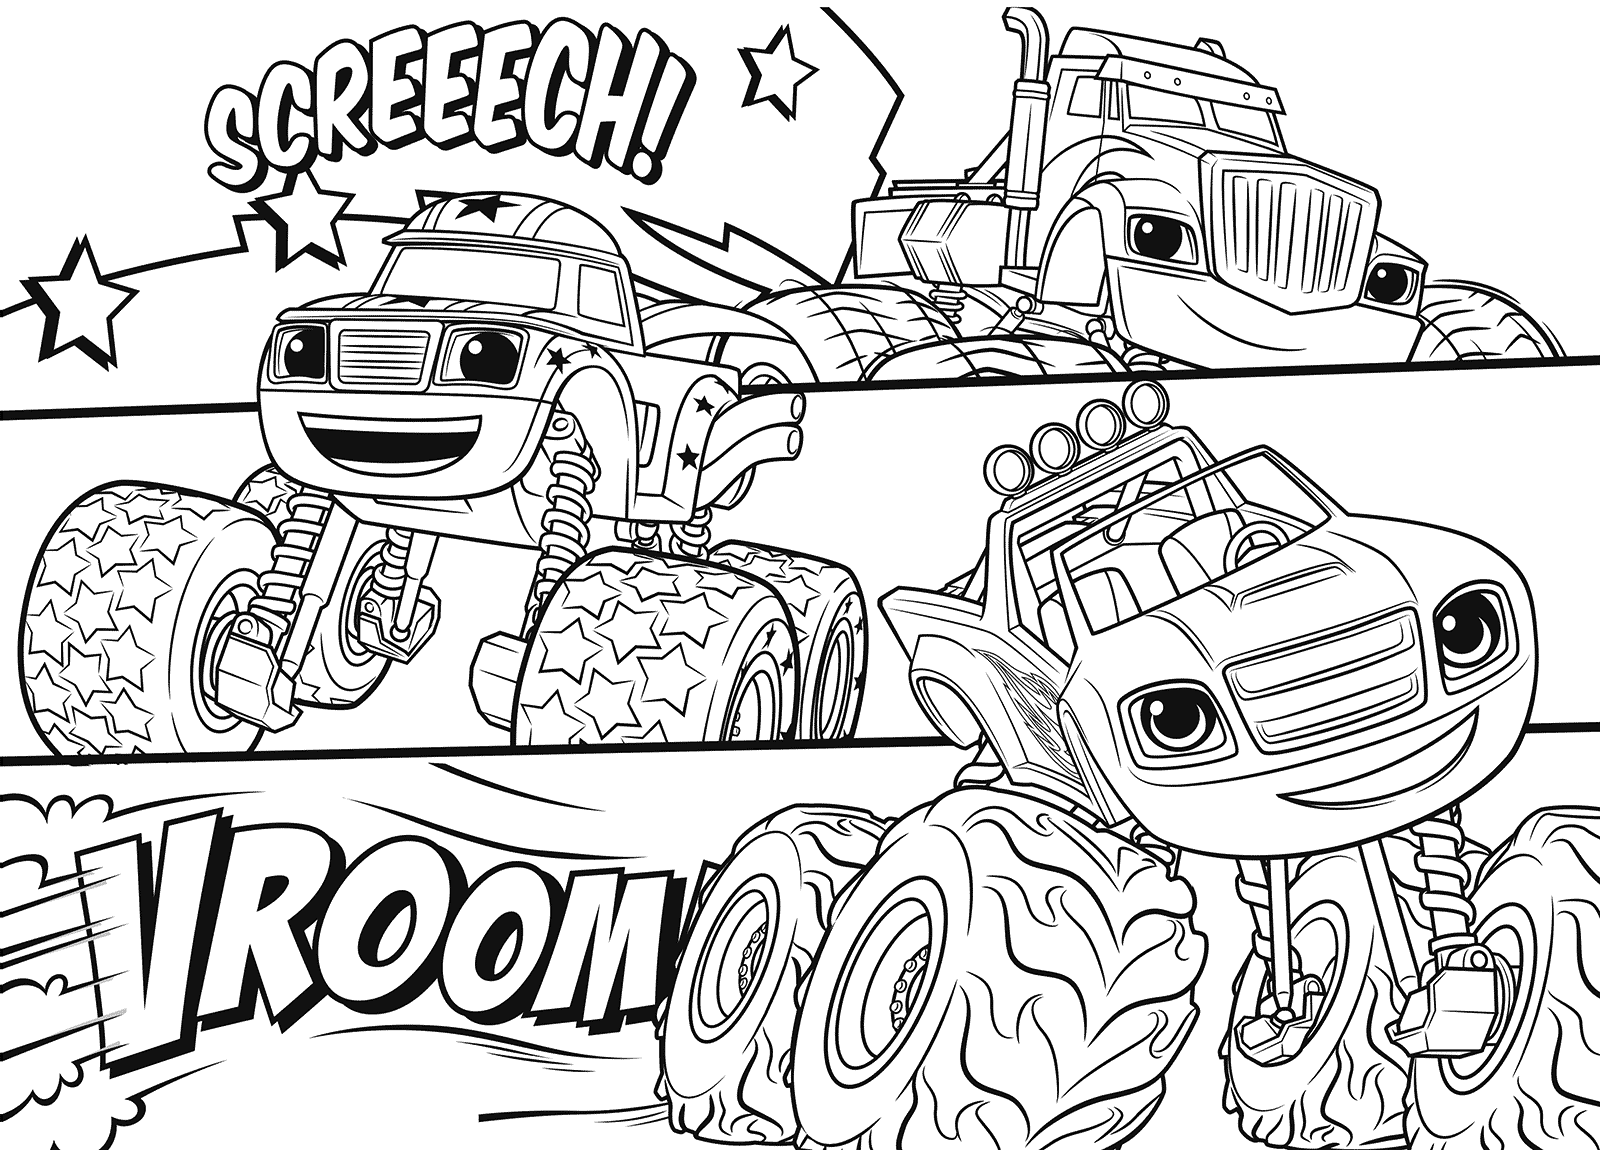 coloring pages of blaze and the monster machines